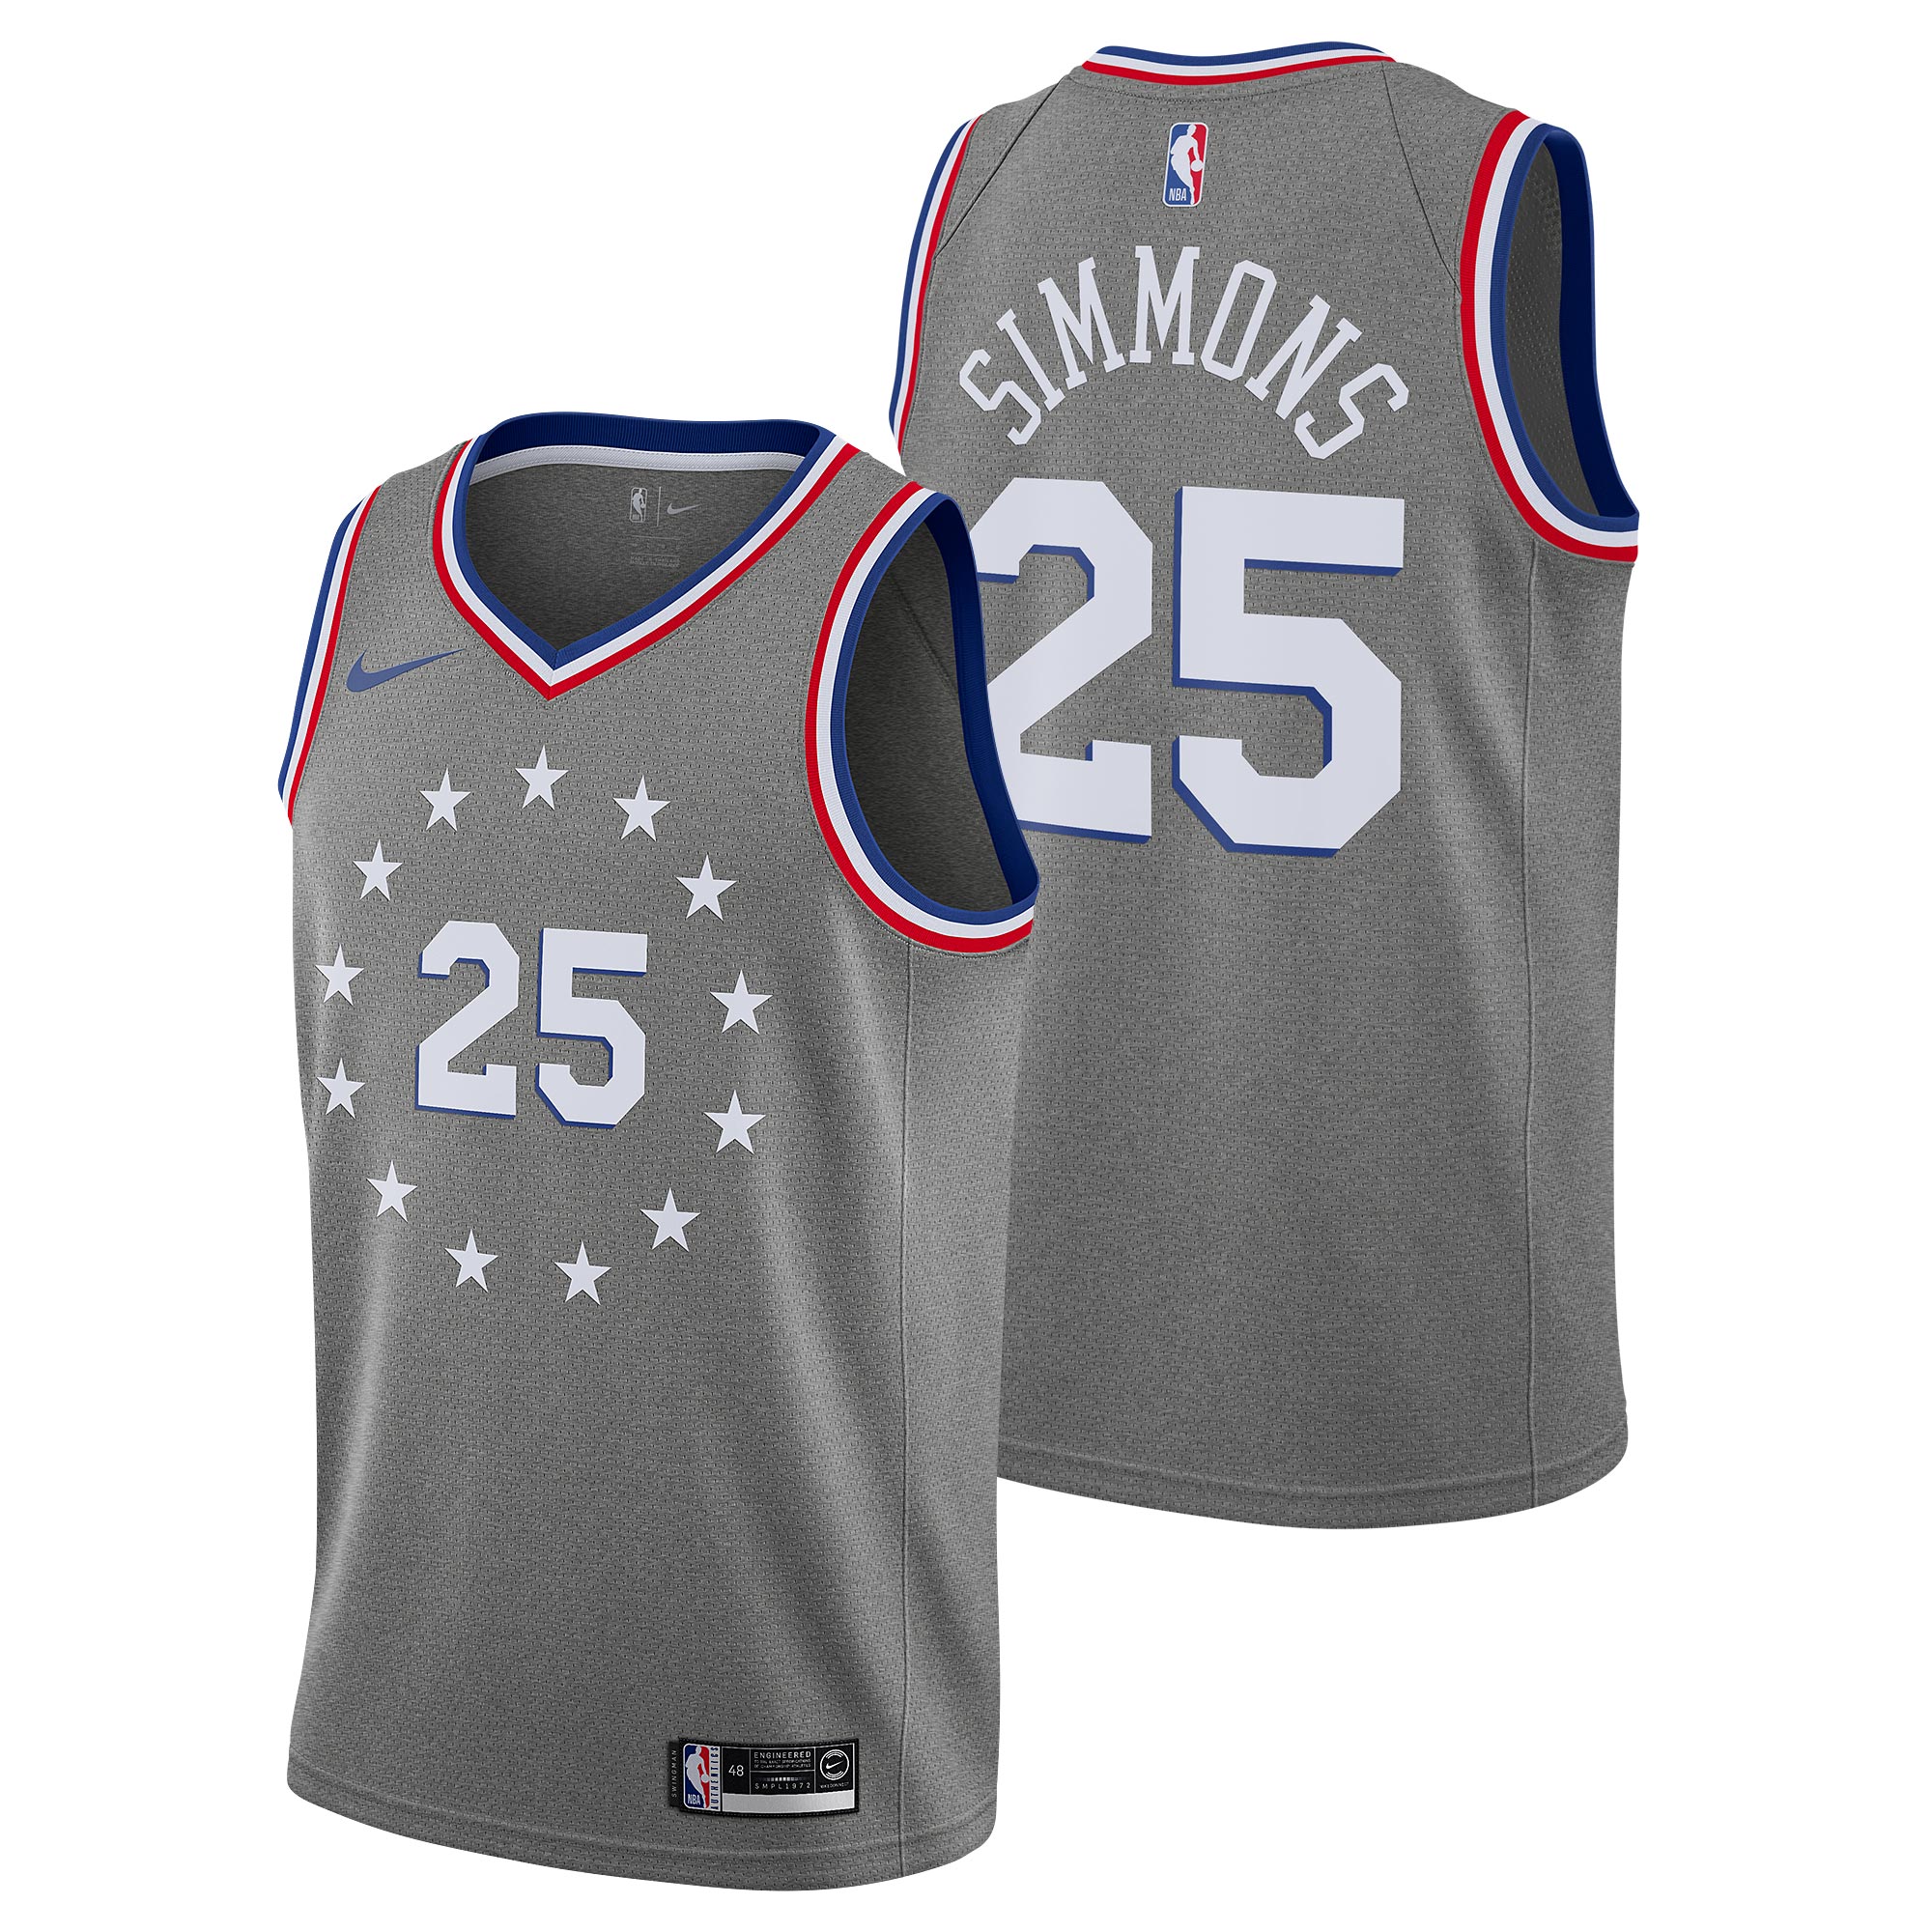 Buy > sixers city edition jersey 2018 > in stock